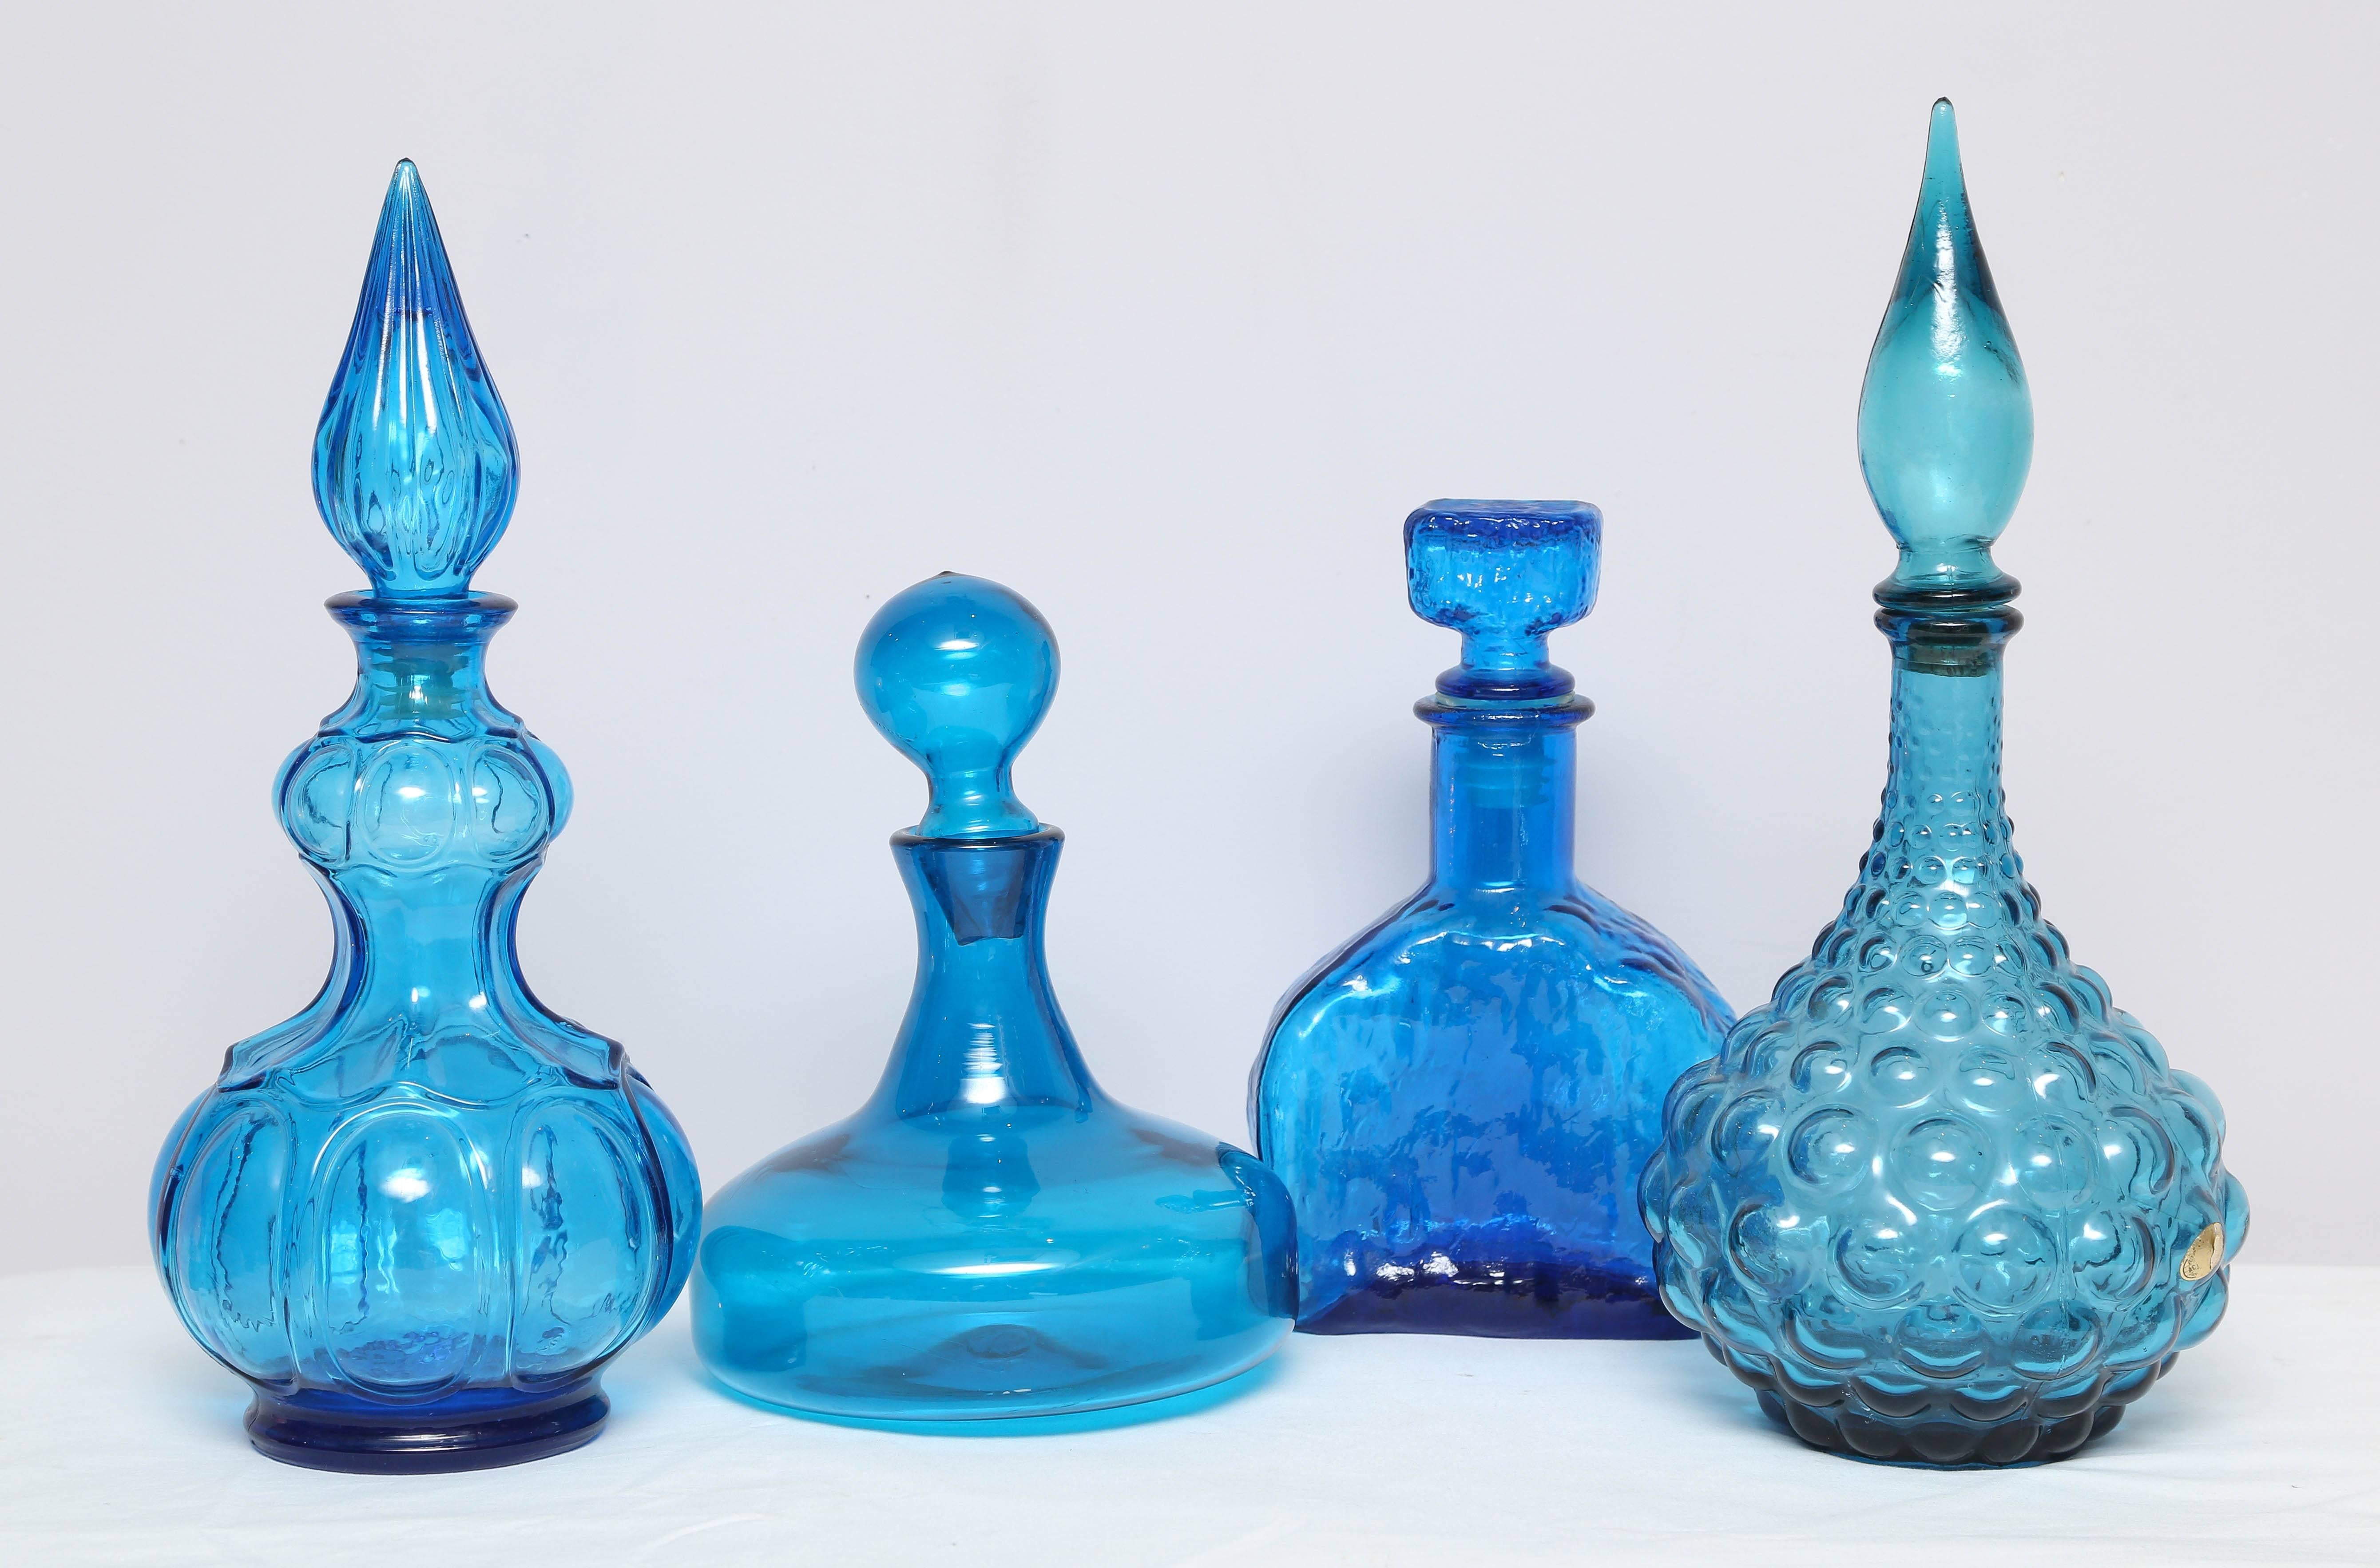 All bottles have a different shape, measurements given are for the tallest and the widest, while they can be purchased individually, together they make a strong statement.
What is great that while the shade of blues might change, the grouping